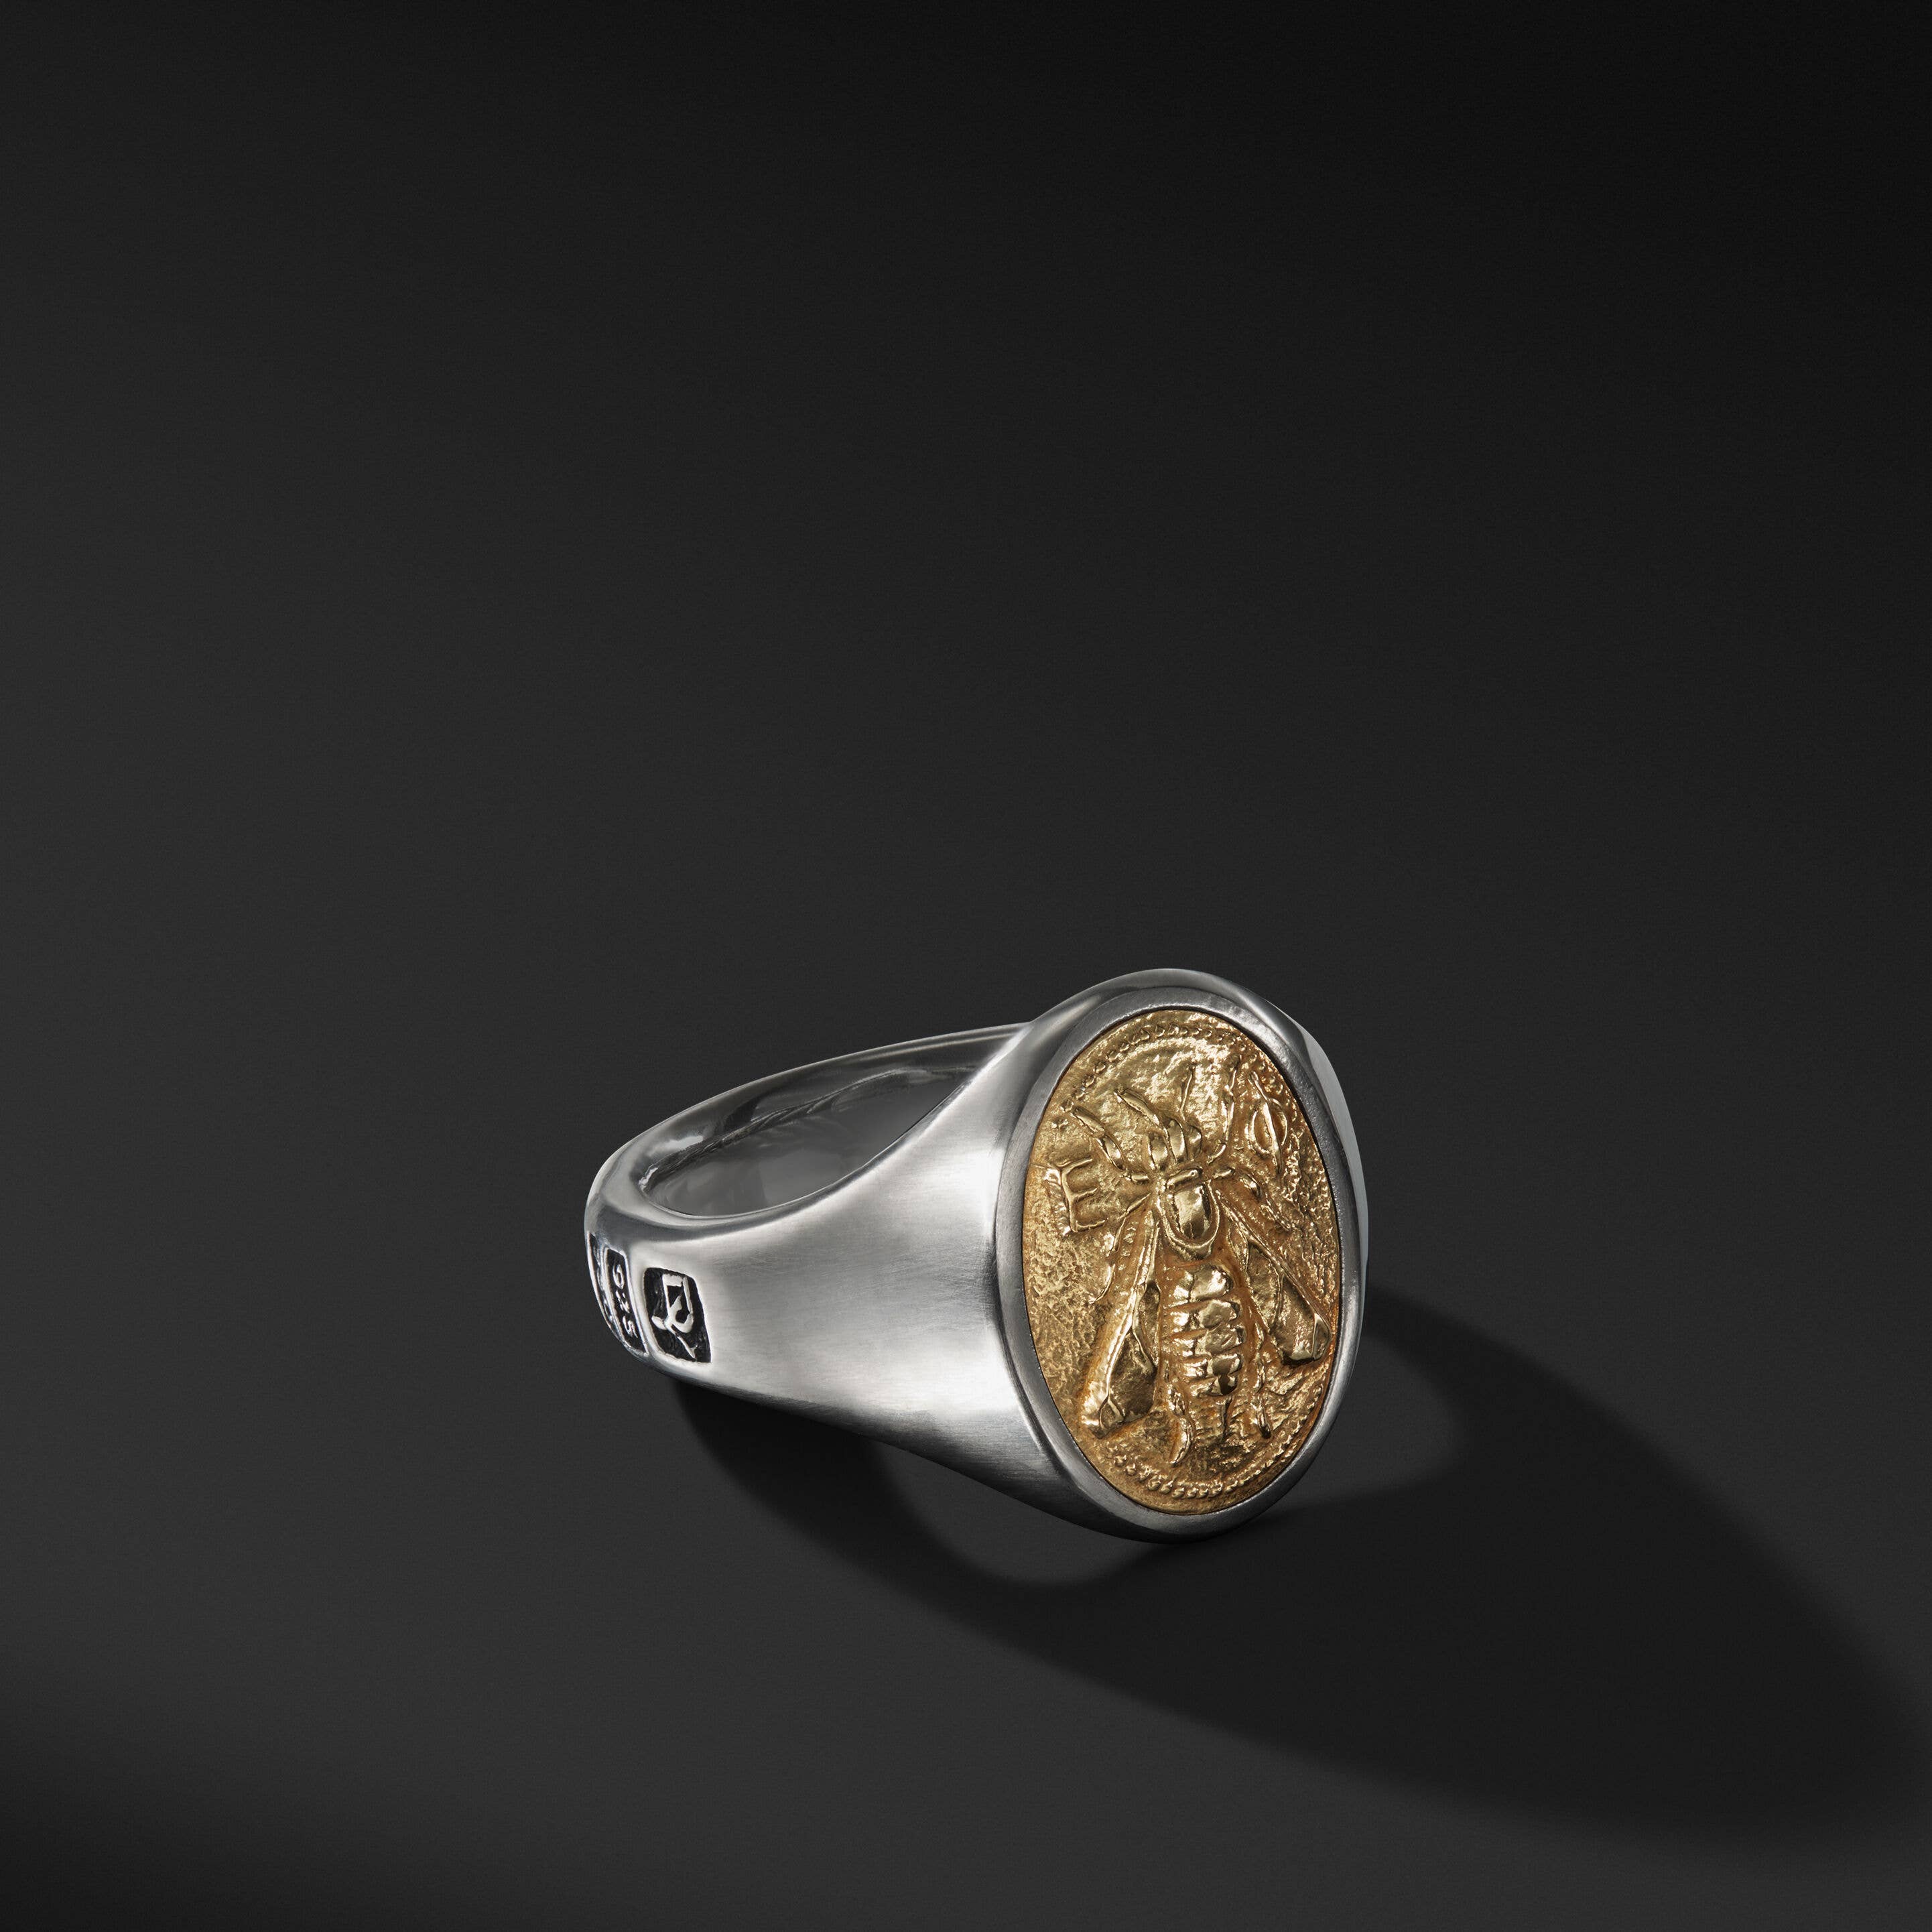 Petrvs® Bee Signet Ring with 18K Yellow Gold